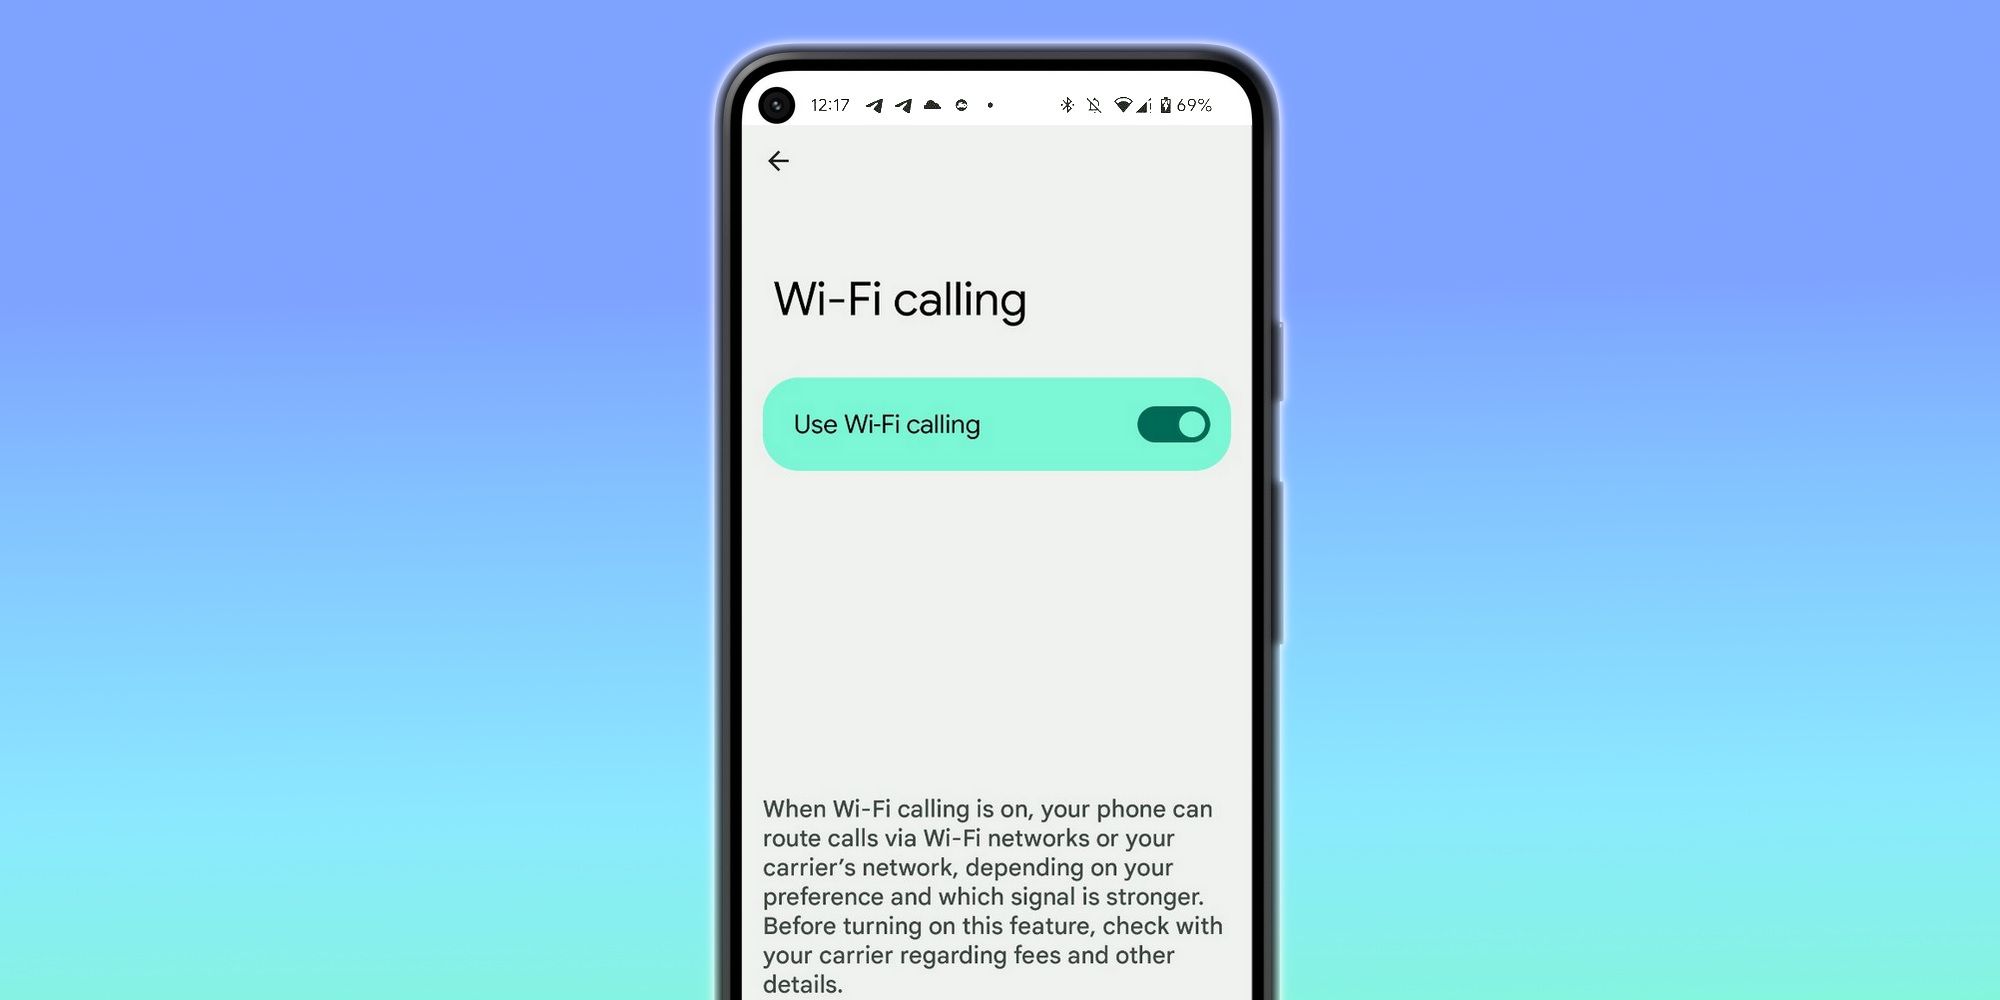 What is WiFi Calling and How to Use it in iPhone?